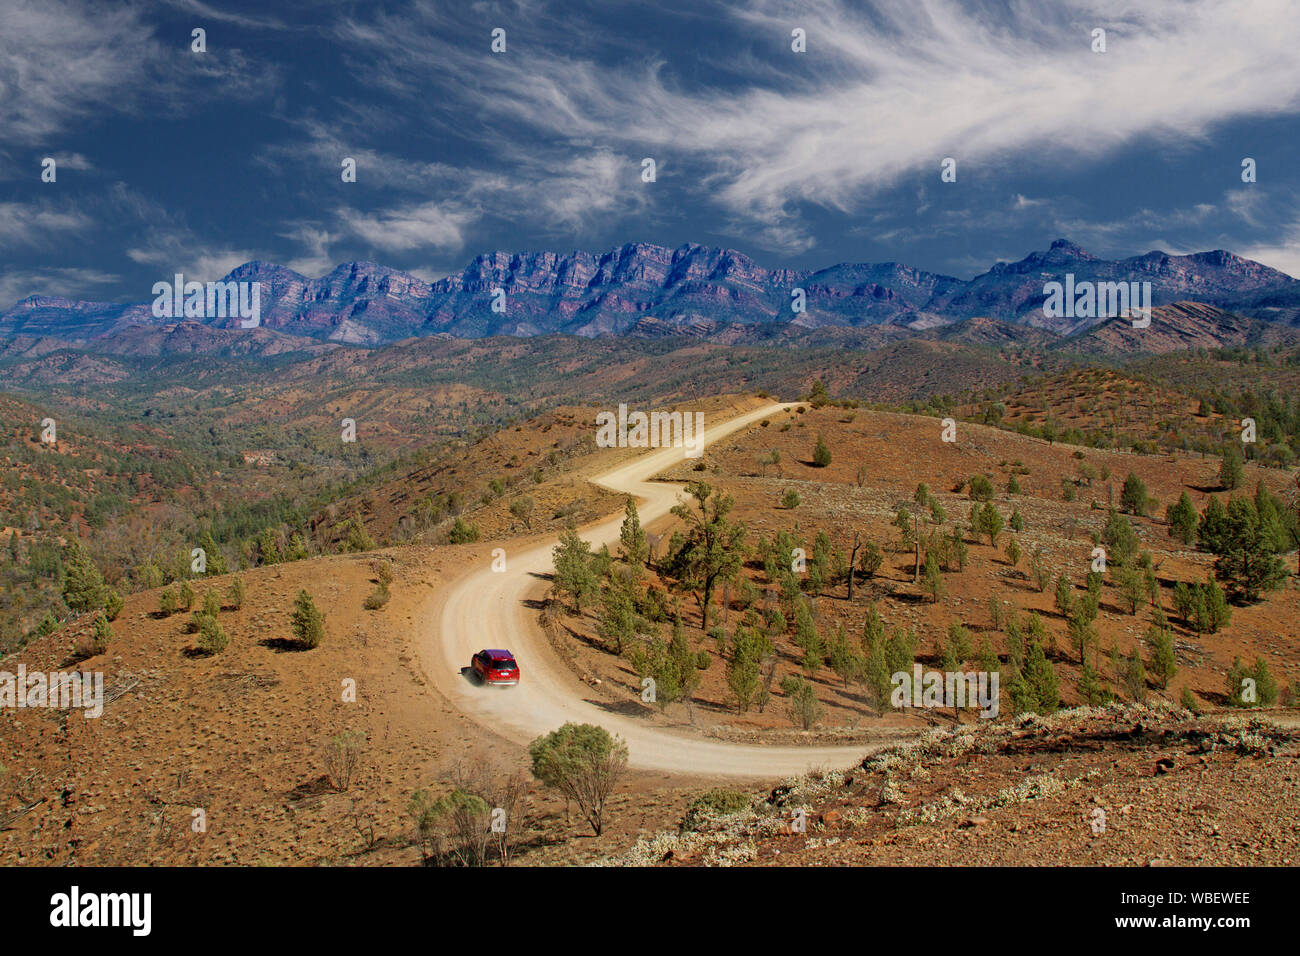 Road winding through Flinders Ranges National Park with rugged rocky ranges reaching up into blue sky streaked with clouds, South Australia Stock Photo